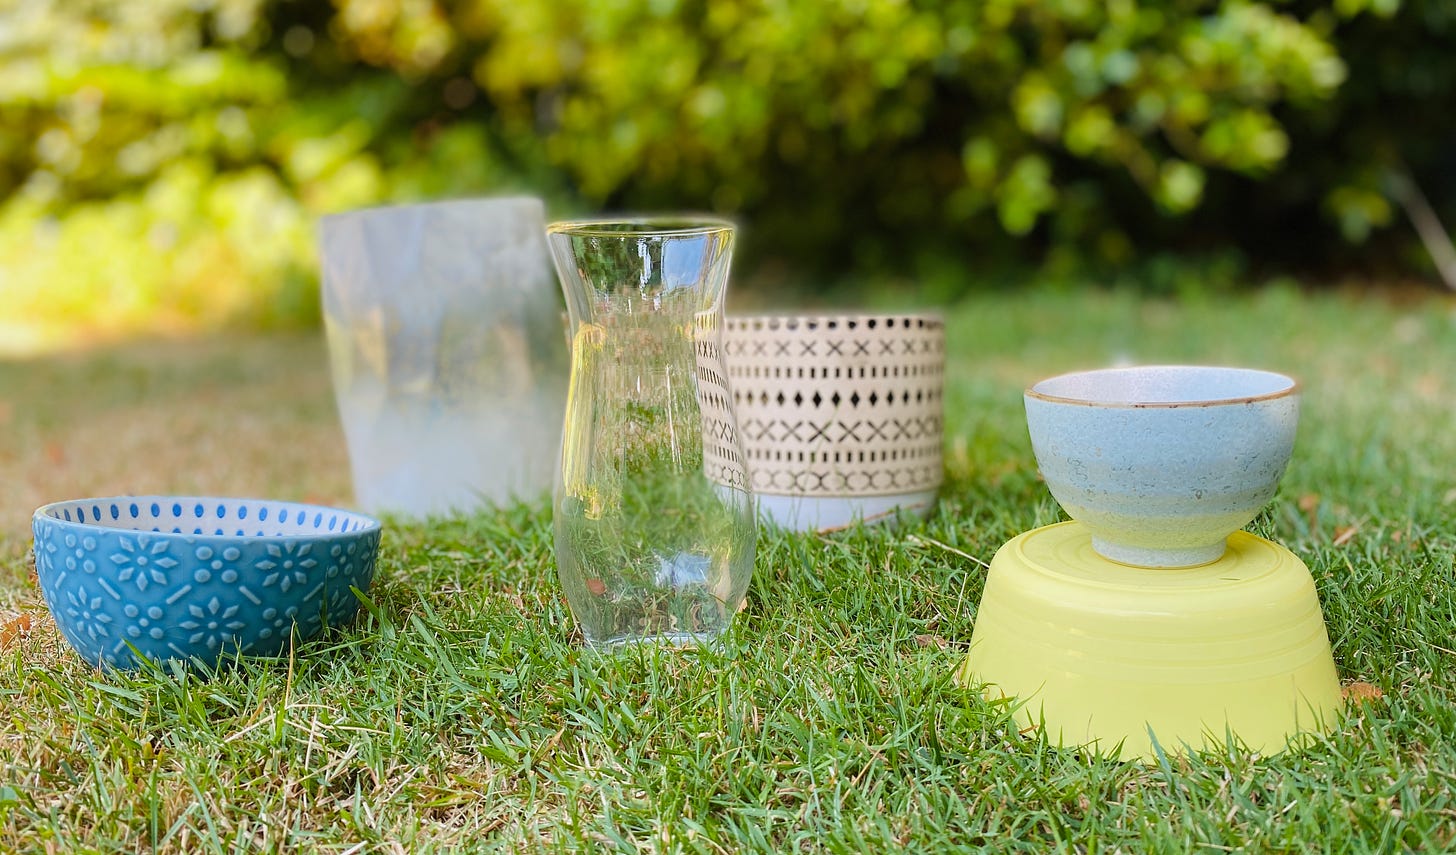 different bowls and vases sit on some grass